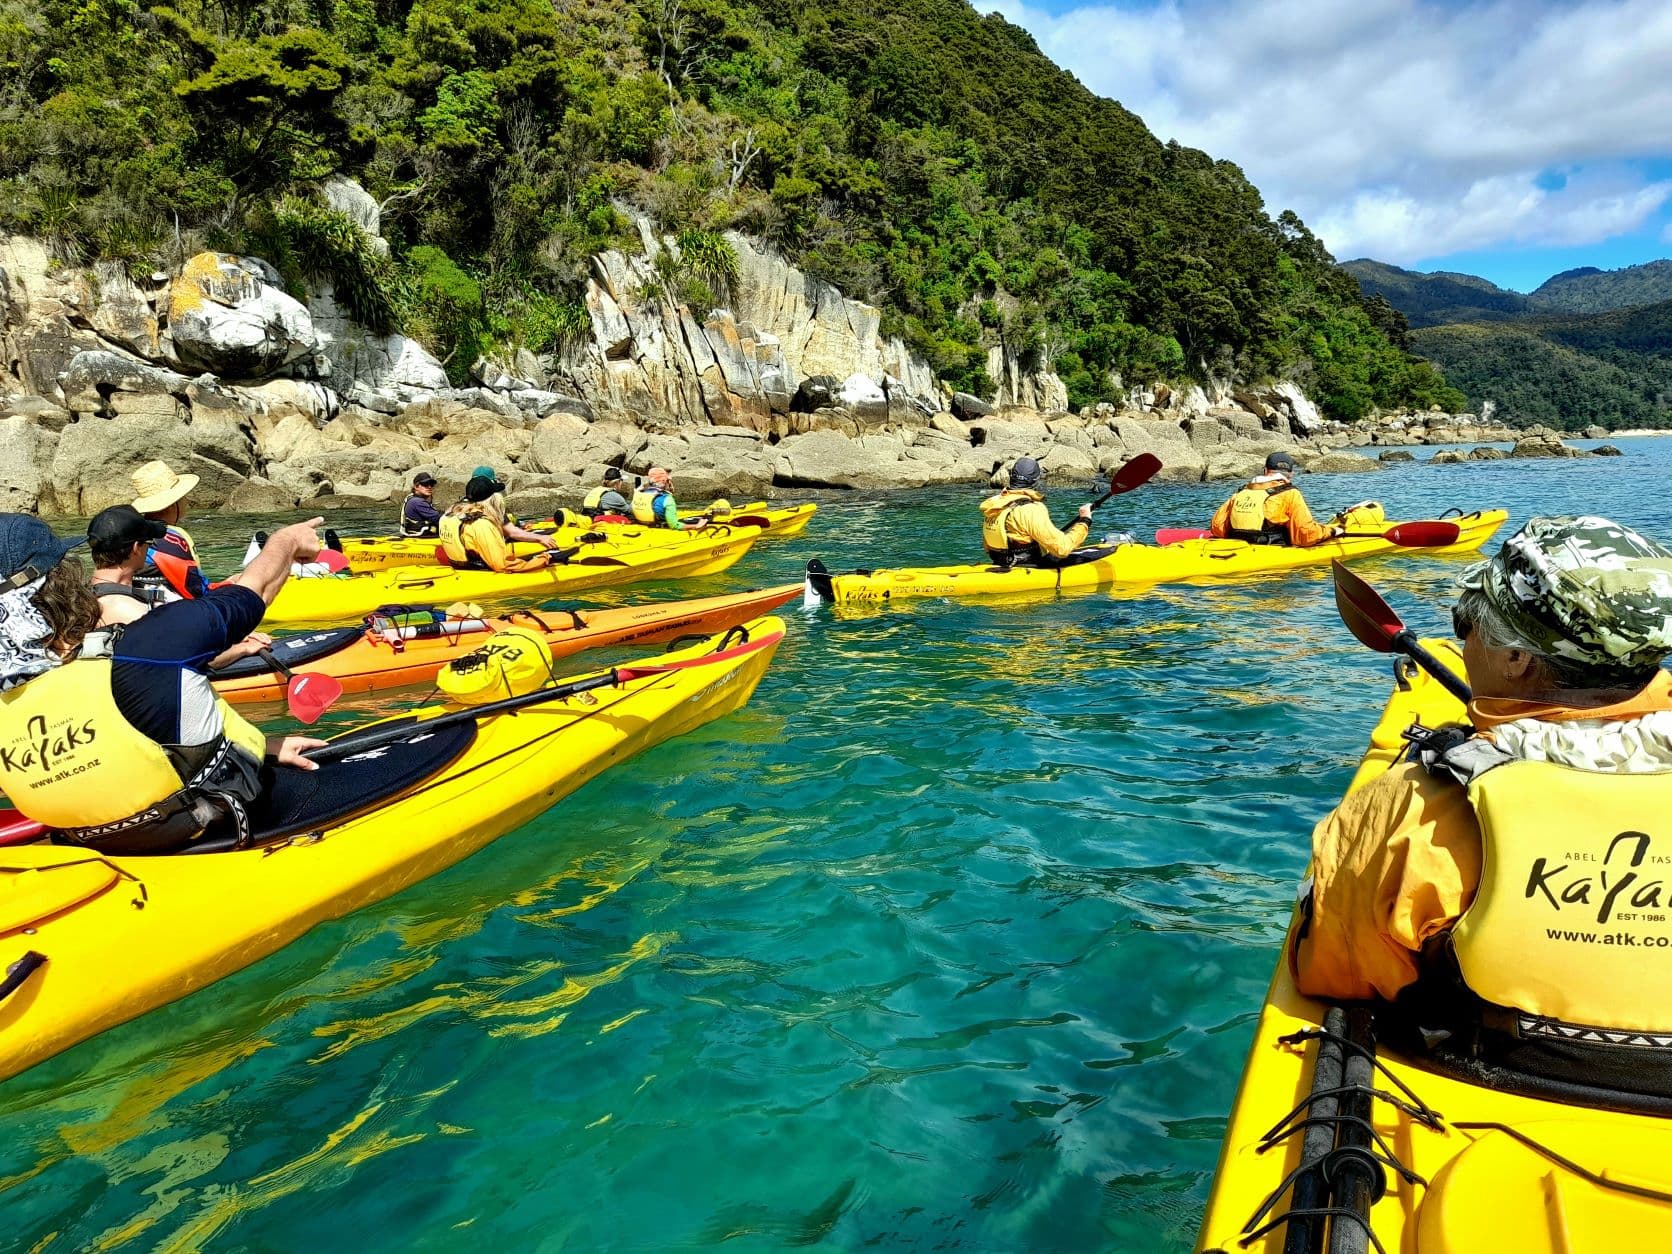 A group of clients on a kayaking adventure